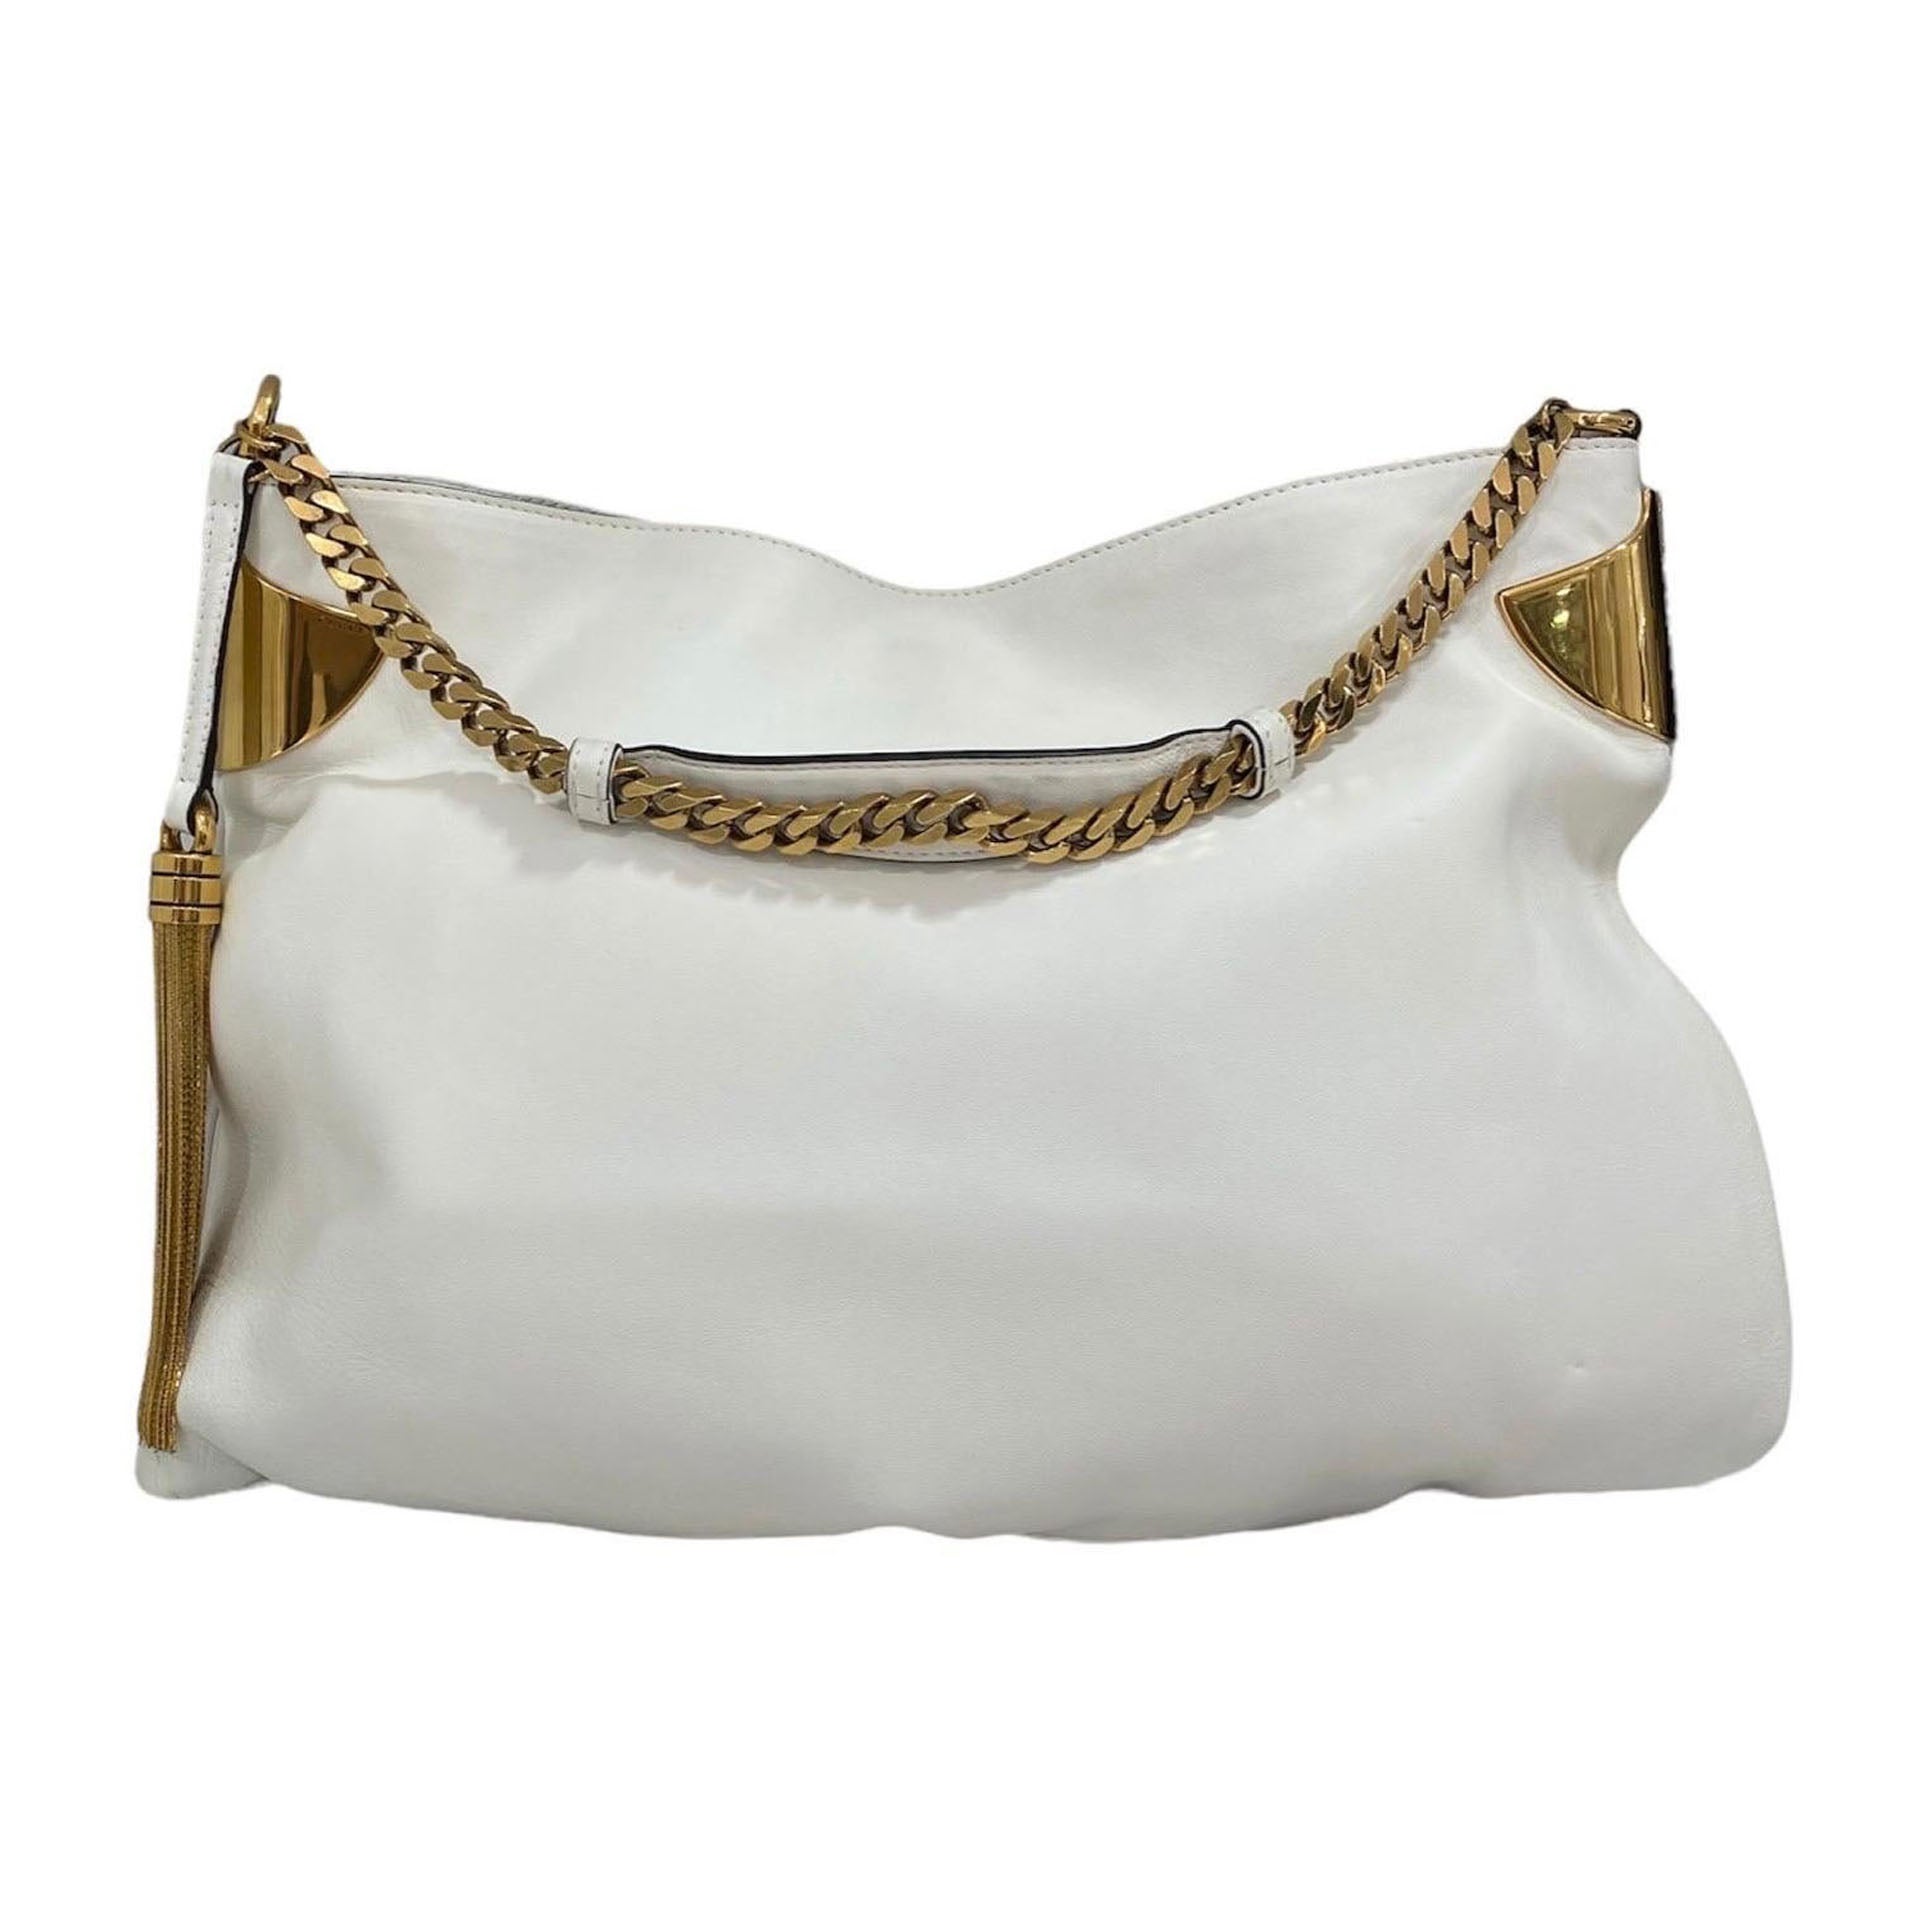 Gucci Shoulder Bag White And Gold For Sale